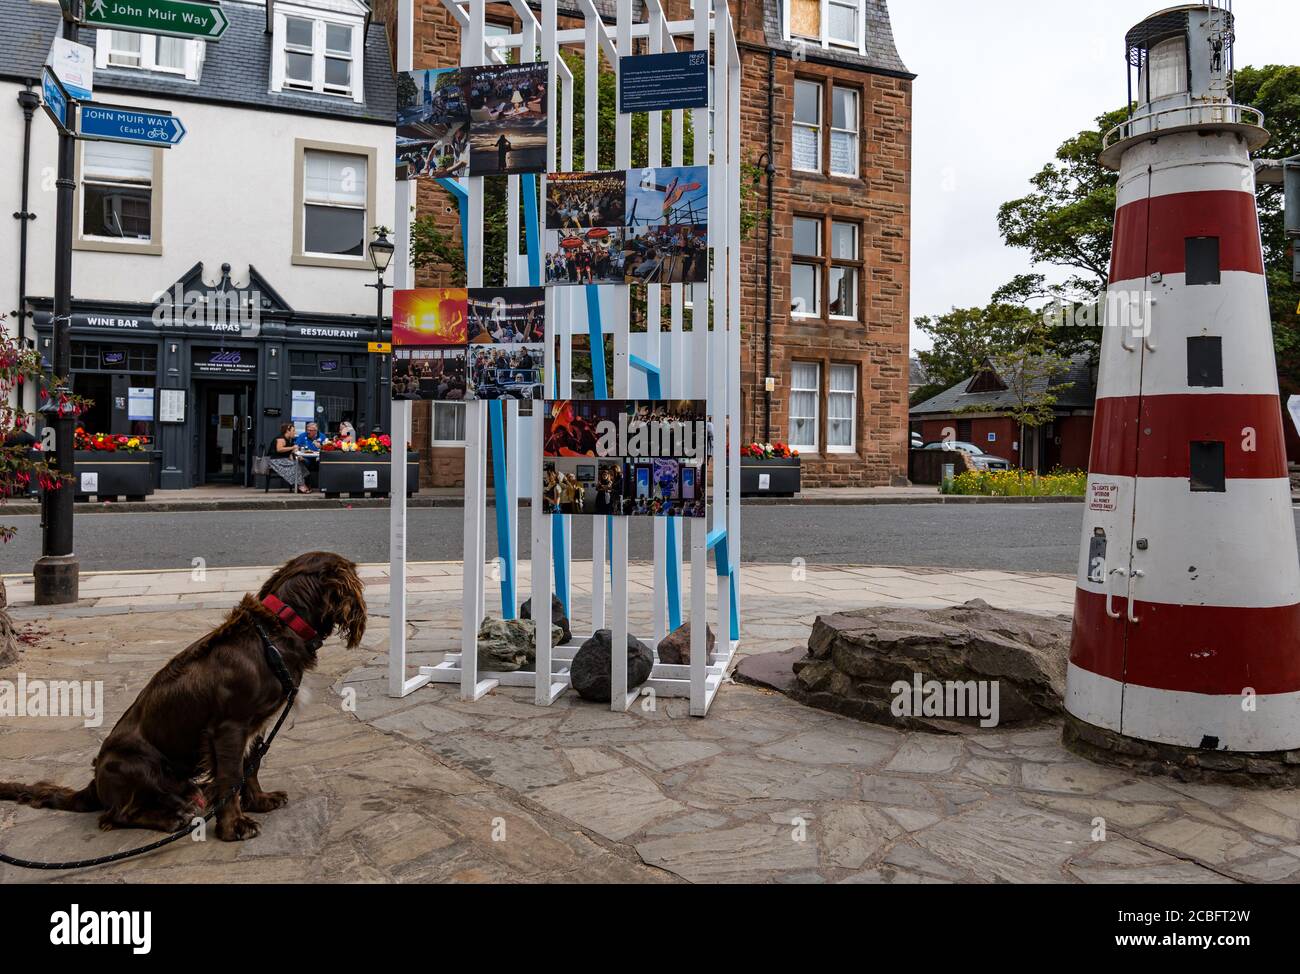 North Berwick, East Lothian, Scotland, United Kingdom, 13th August 2020. Covid-19 effects: A display of photographs of previous Fringe -by-the-Sea reminds visitors of the cancellation of this year's festival which would have been on at the moment Stock Photo